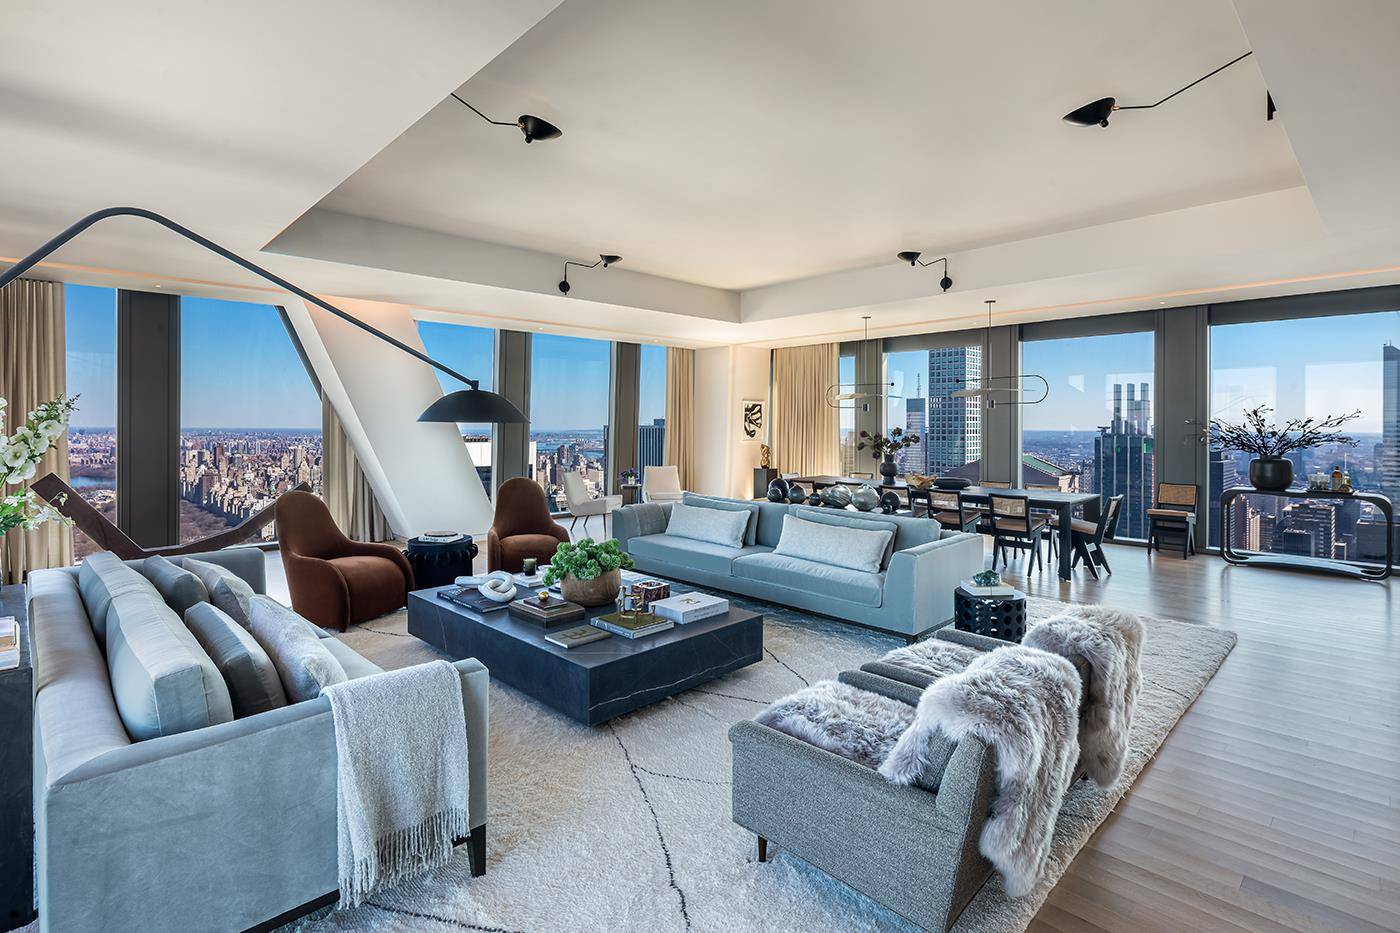 Comprising the entire 64th floor at 53 West 53, this palatial residence features four bedrooms, four and a half bathrooms, and north, south, east, and west facing exposures.